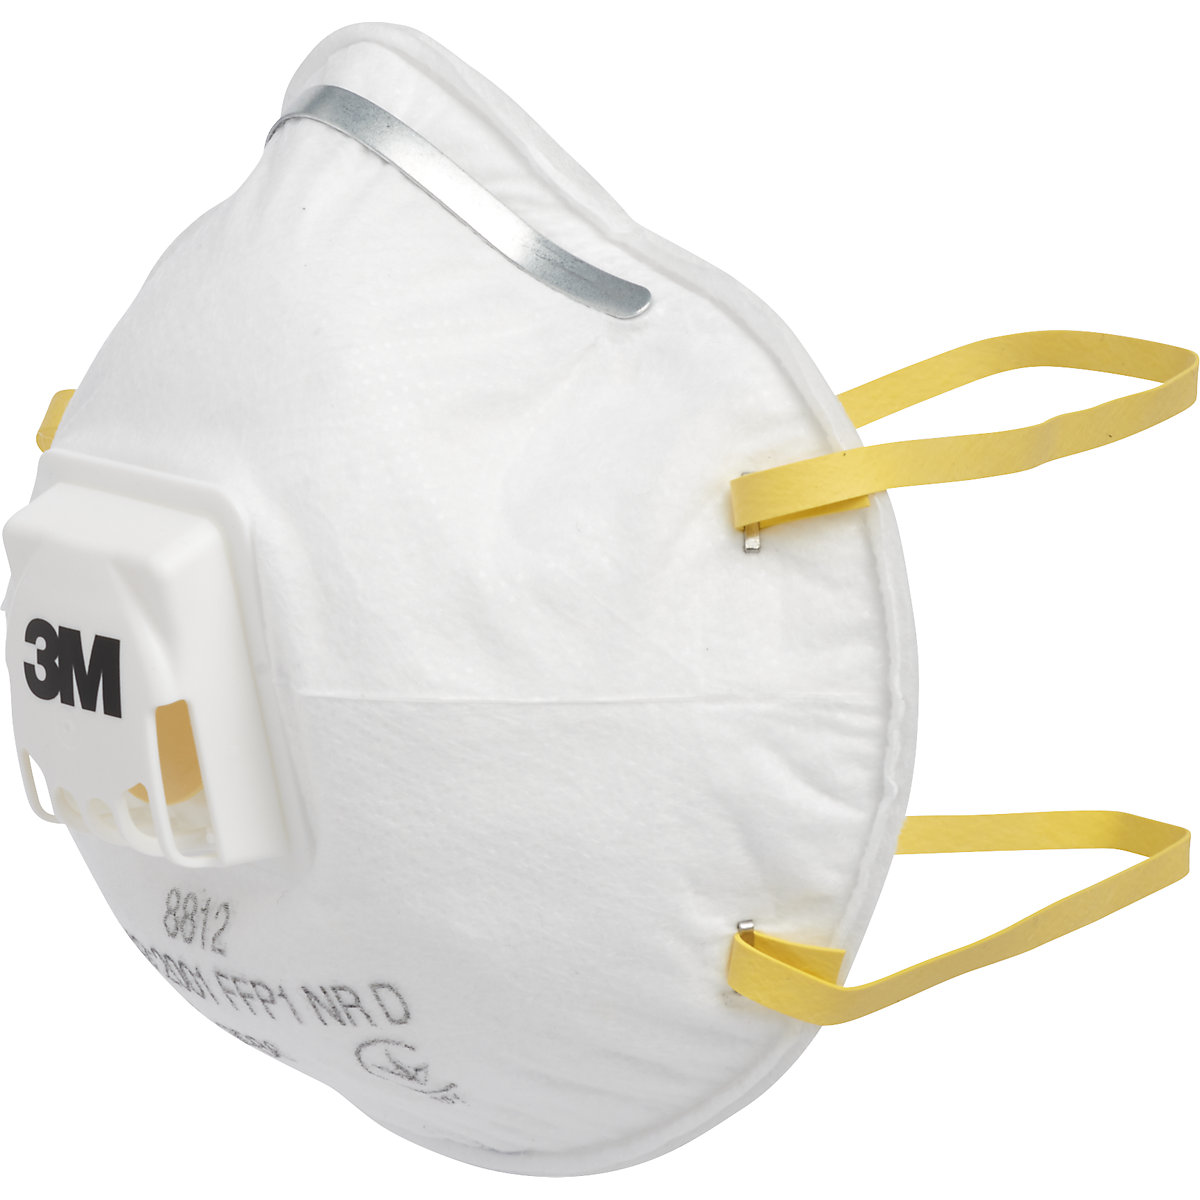 Respiratory protection mask 8812 FFP1 NR D with exhalation valve - 3M